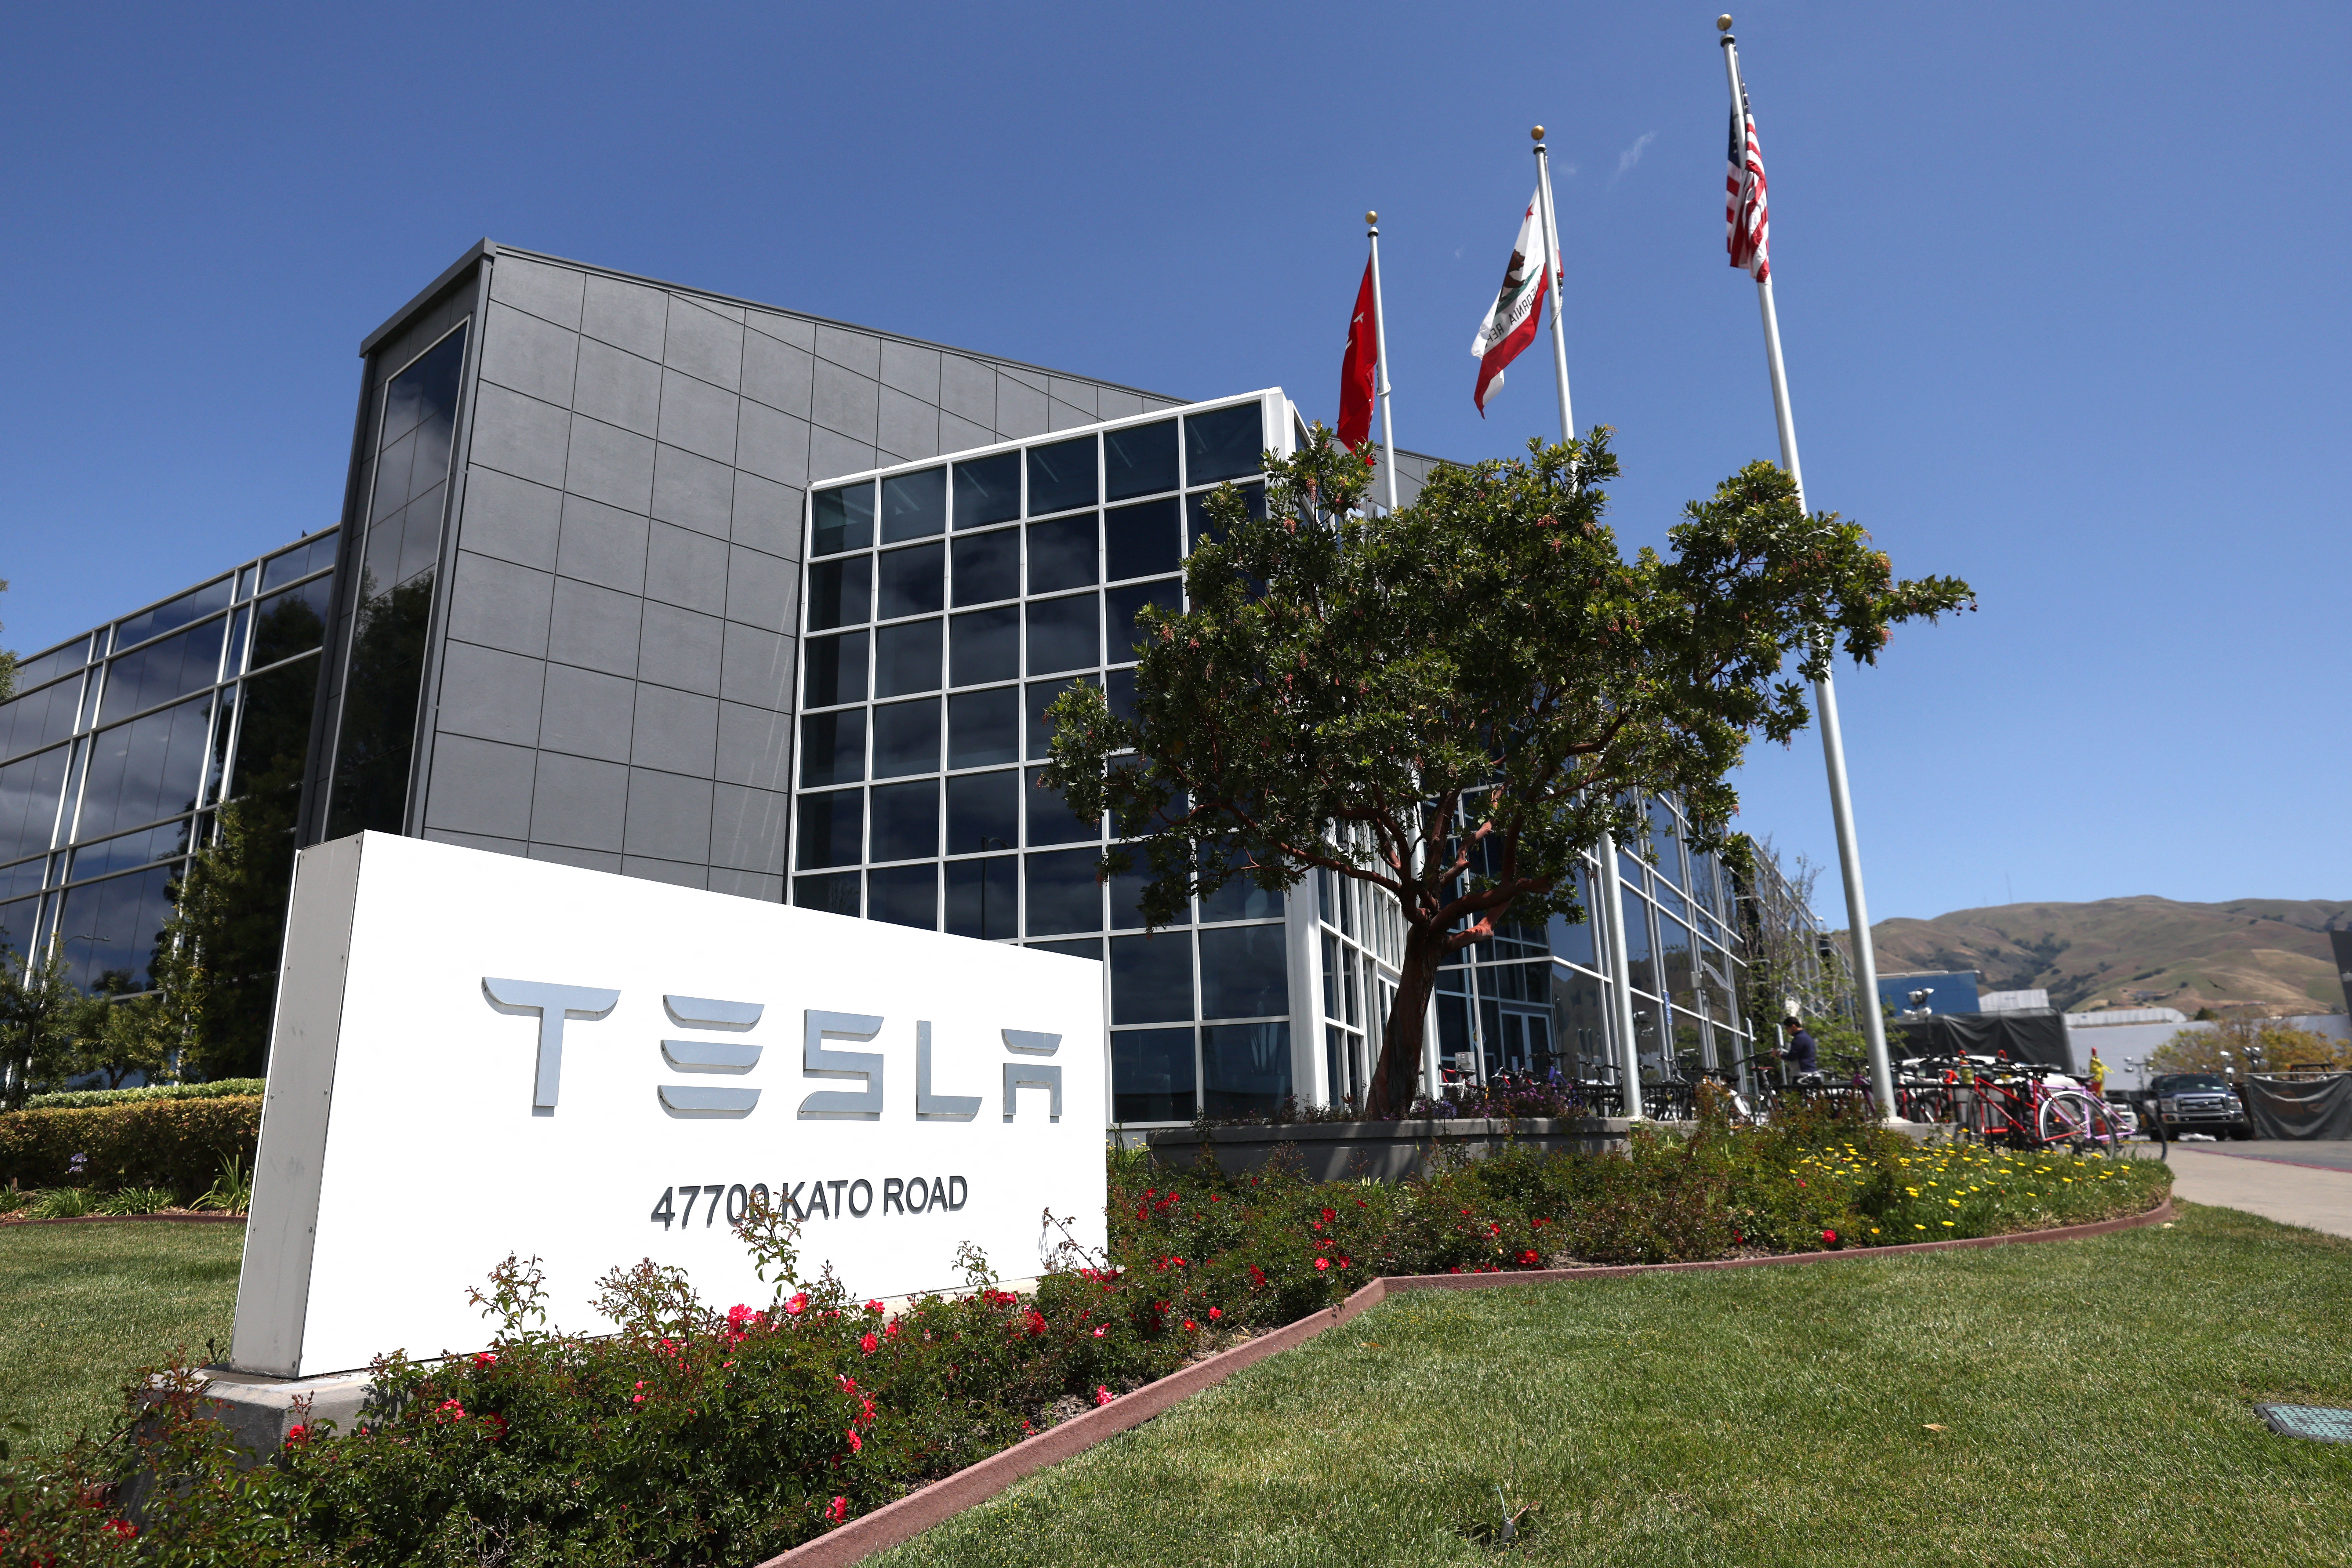 Students — here's how you can get an internship at Tesla